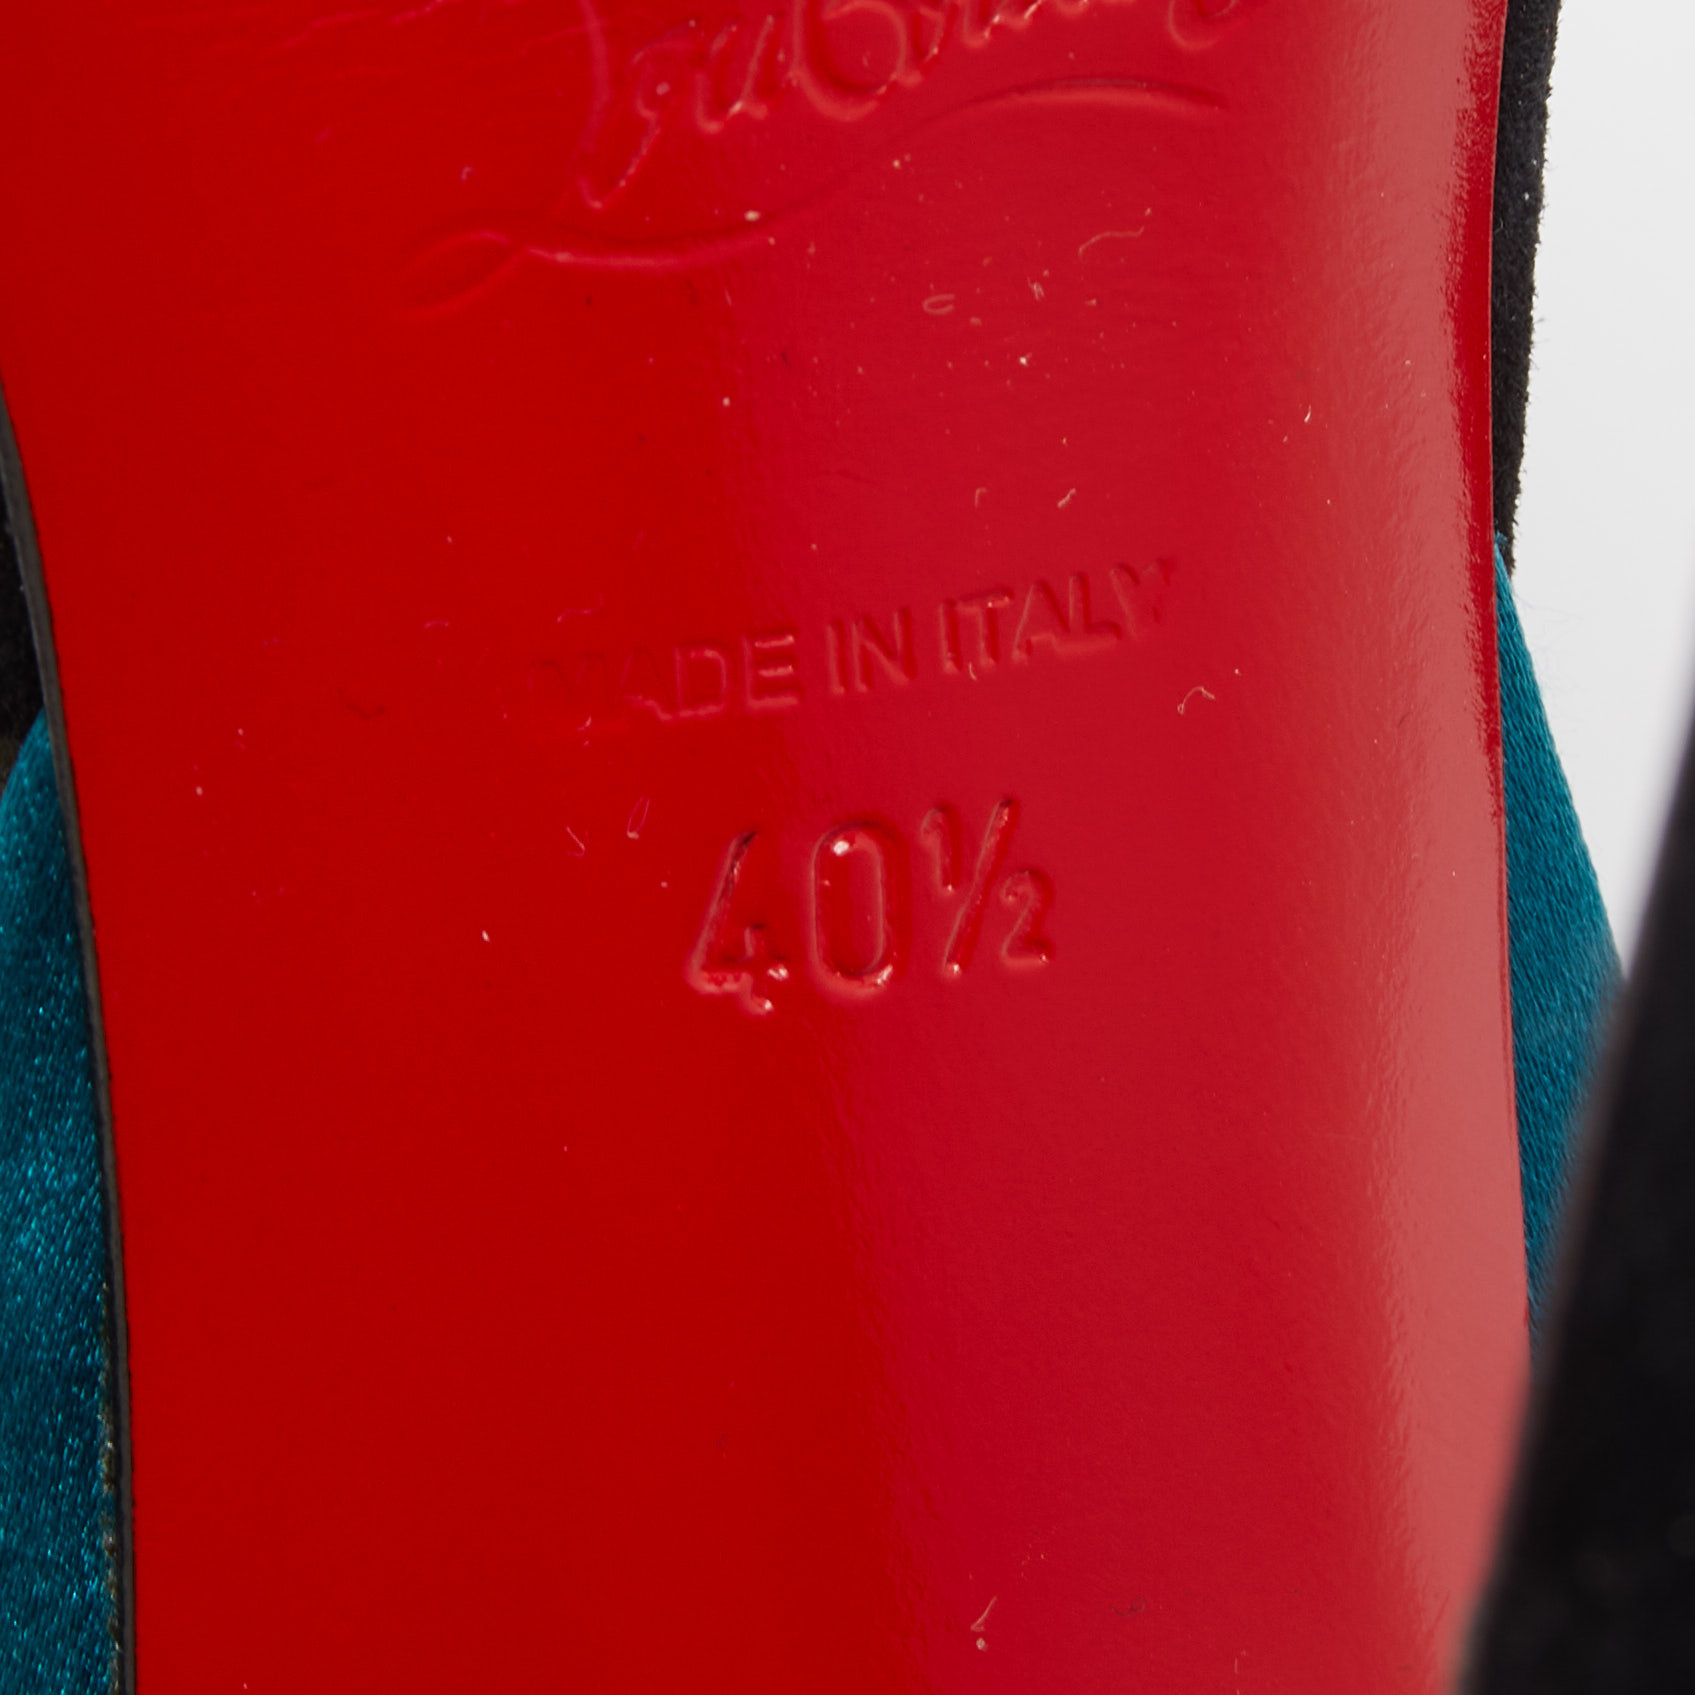 Christian Louboutin Teal/Black Satin And Suede Vampanodo Sandals Size 40.5